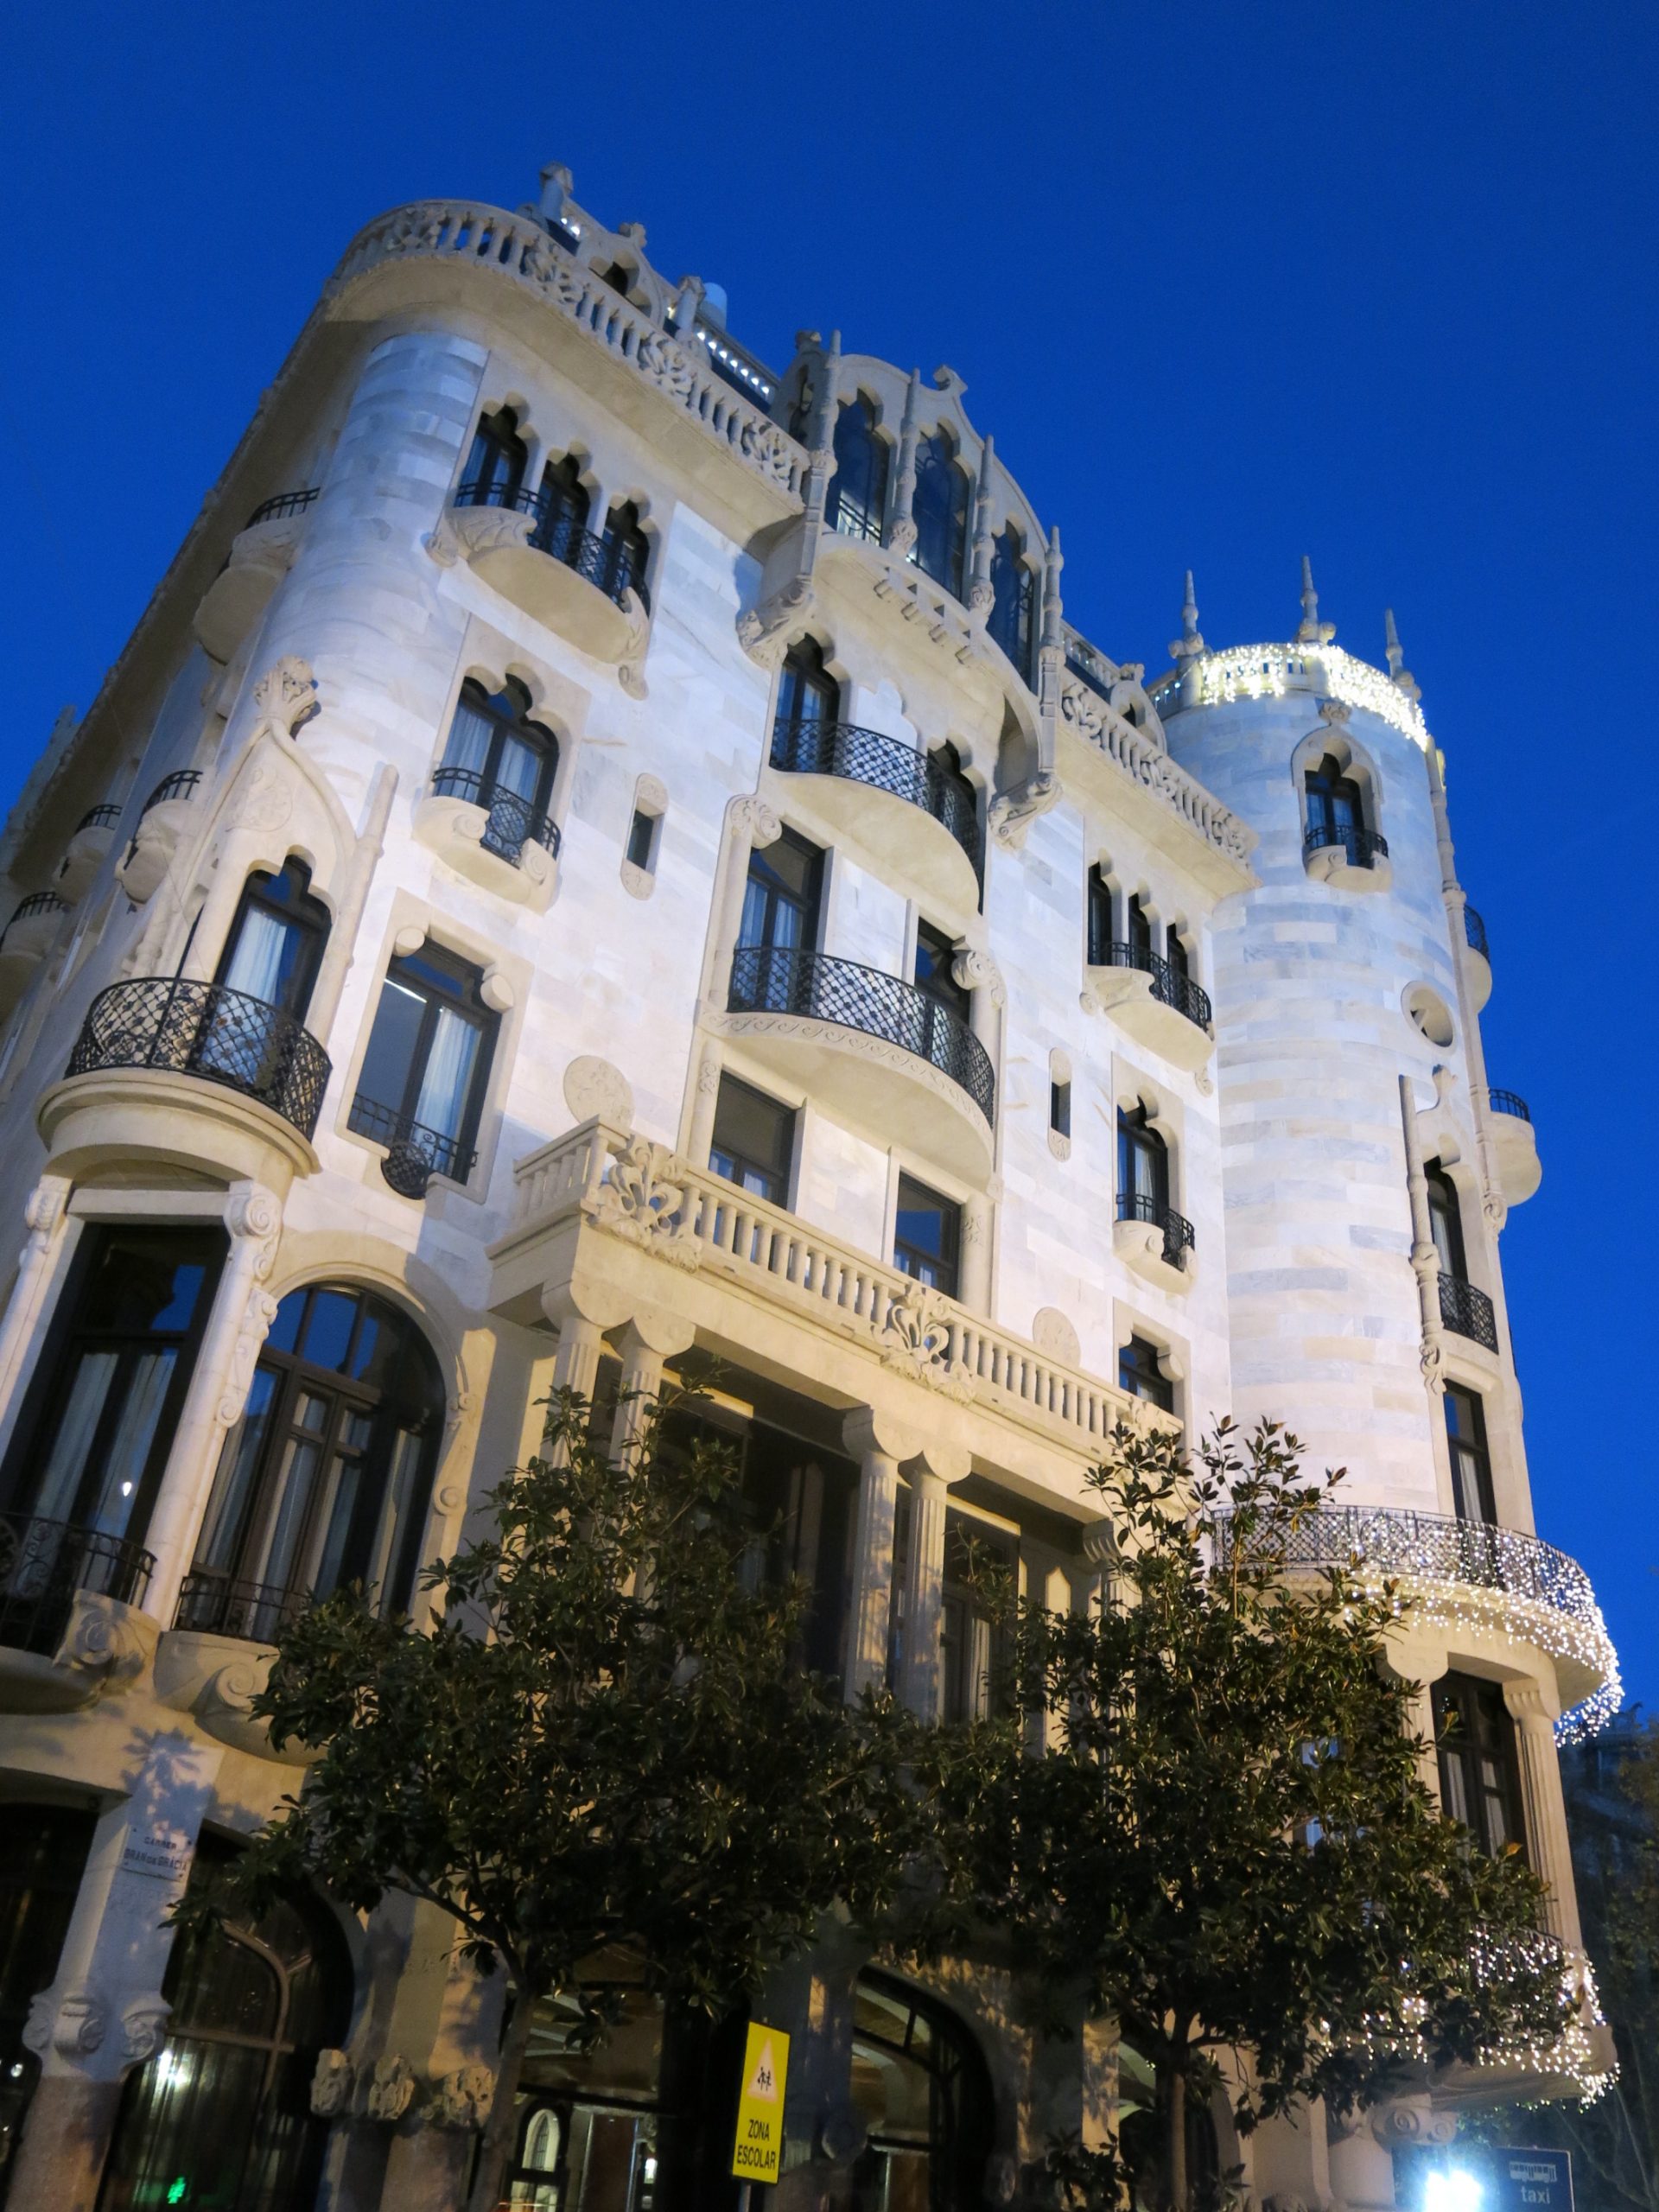 Casa Fuster, 5★ Hotel where history and modernism merge and create magic.